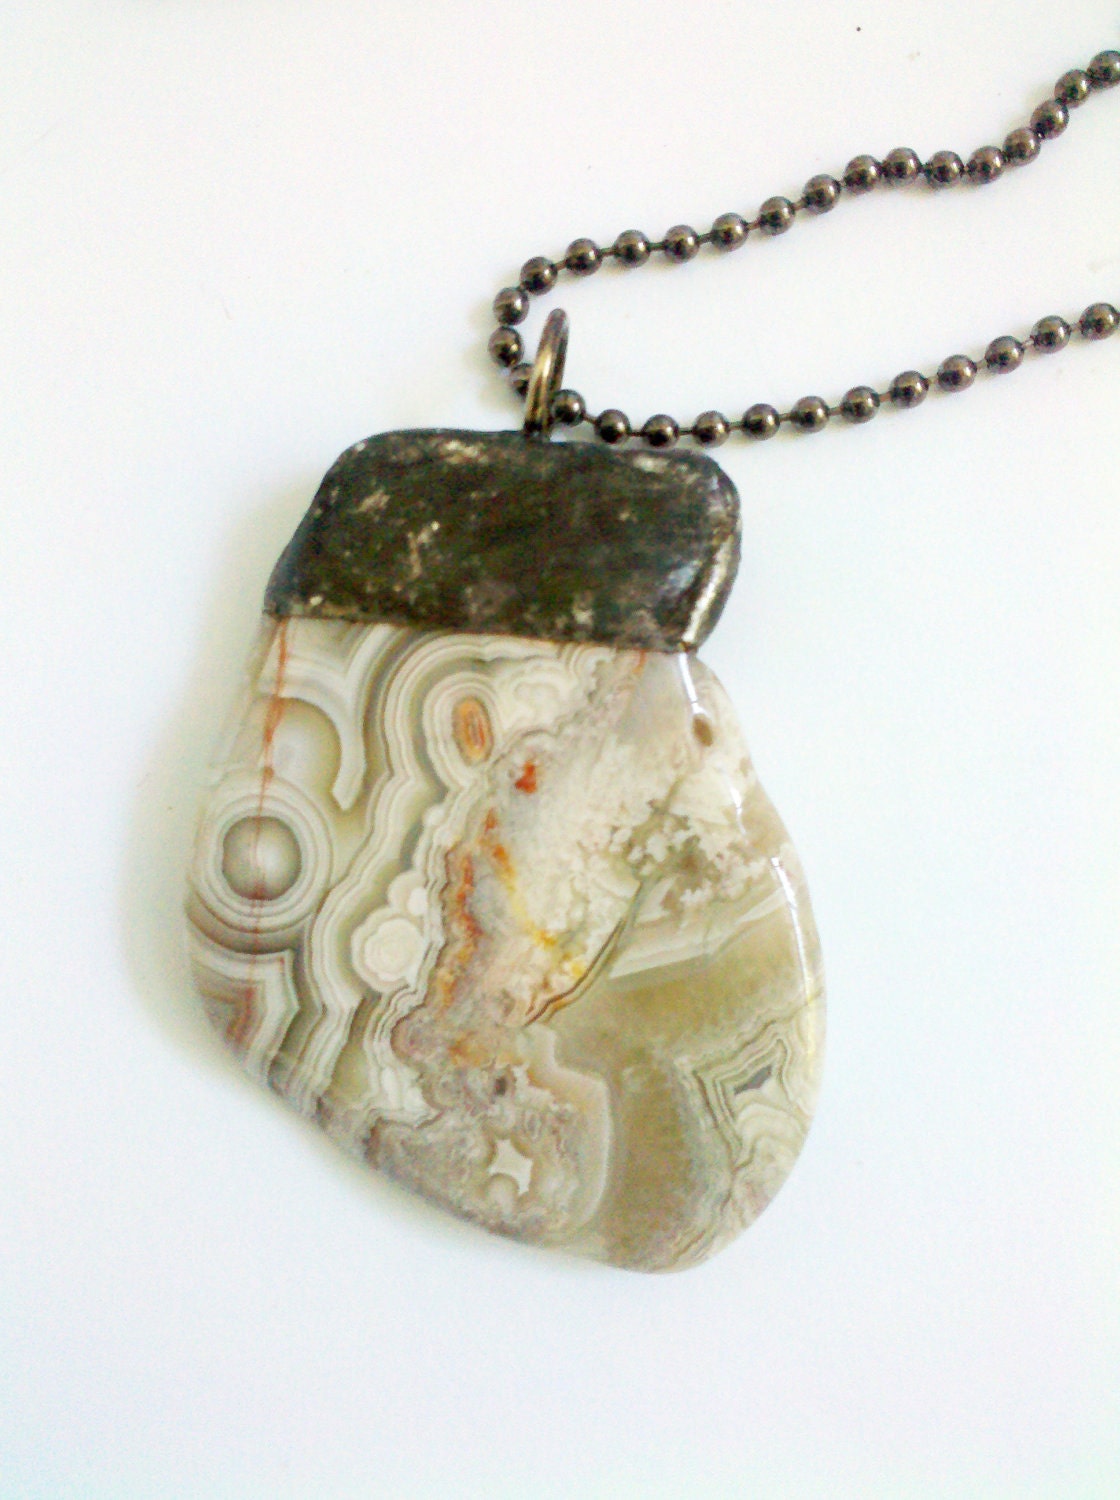 Crazy Lace Agate Crystal Healing Necklace Wiccan Talisman Celtic Charm Agate Pendant Necklace - Laughter Stone - Mystarrrs